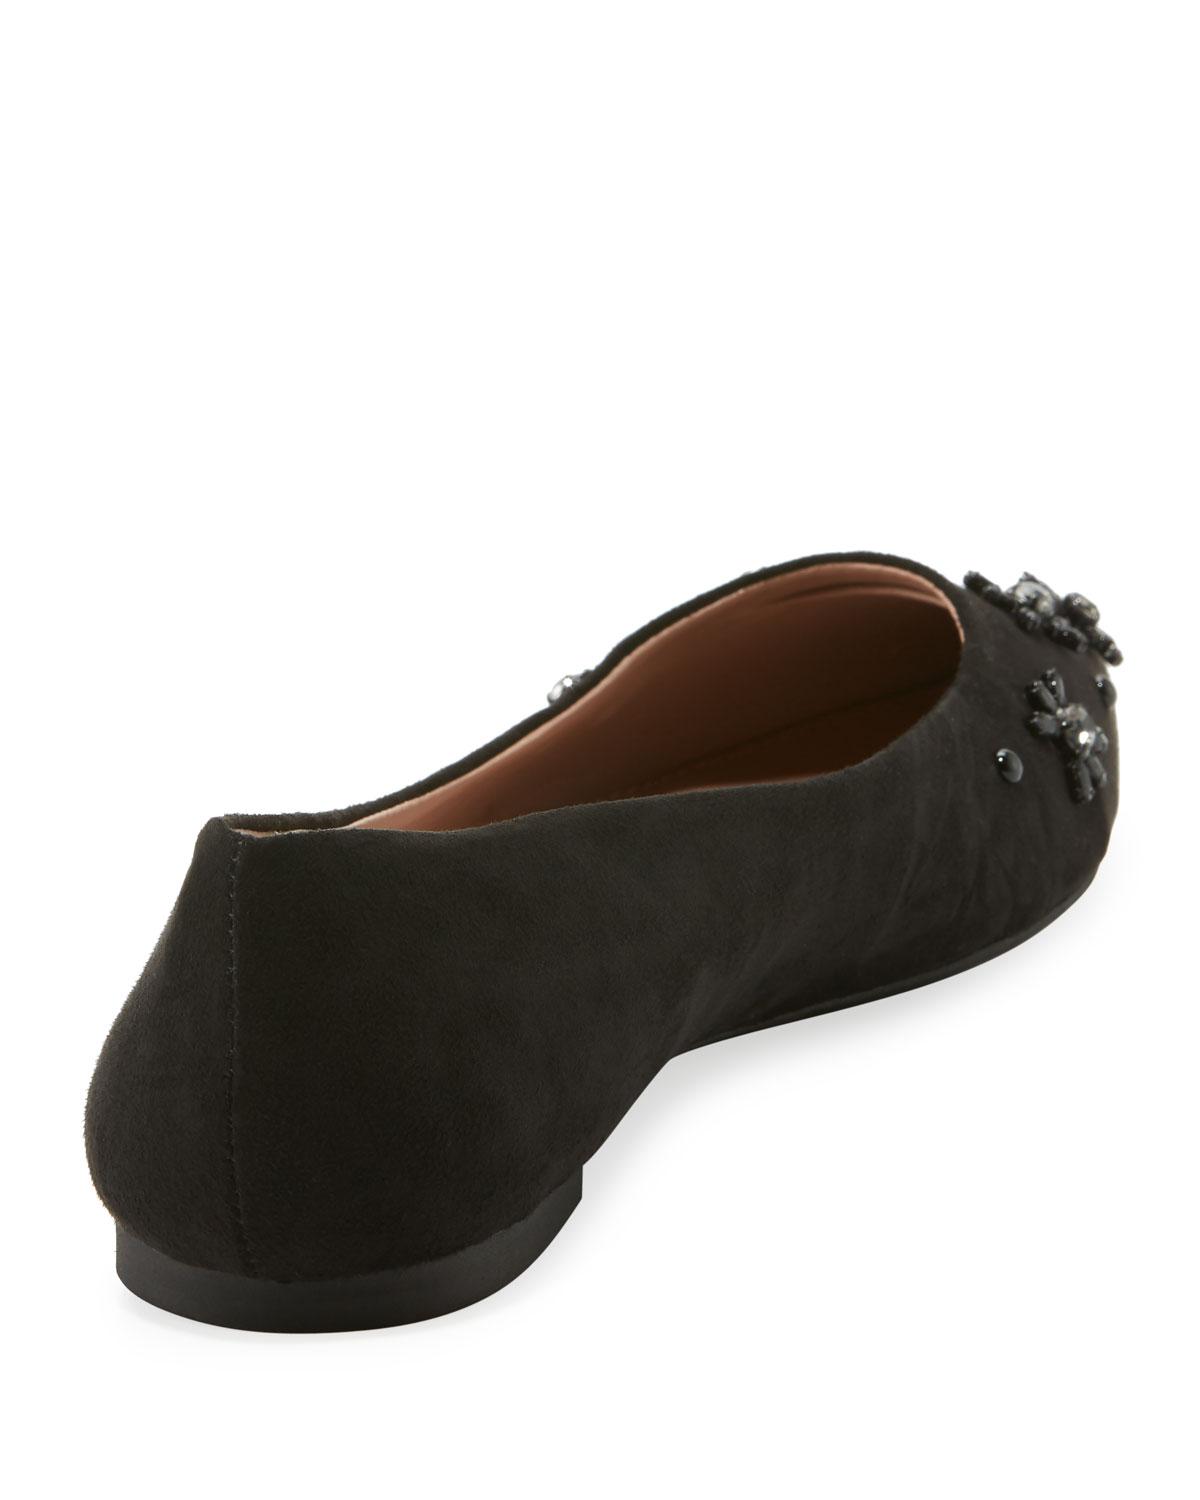 Circus by Sam Edelman Ritchie Embellished Ballet Flats in Black - Lyst